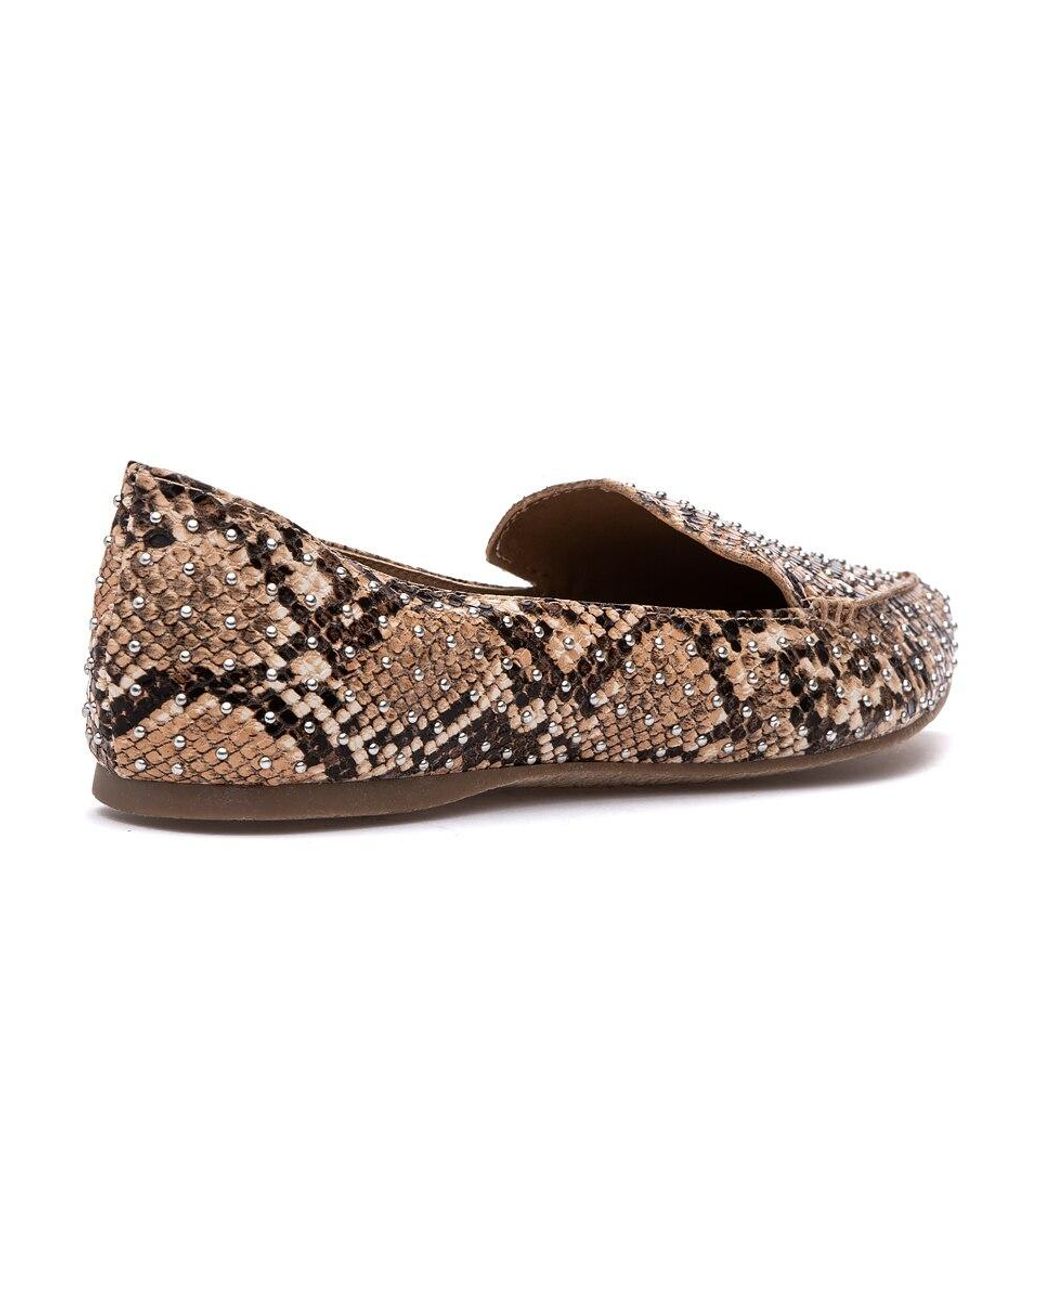 Steve Madden Feather Loafer Tan Snake in Brown | Lyst